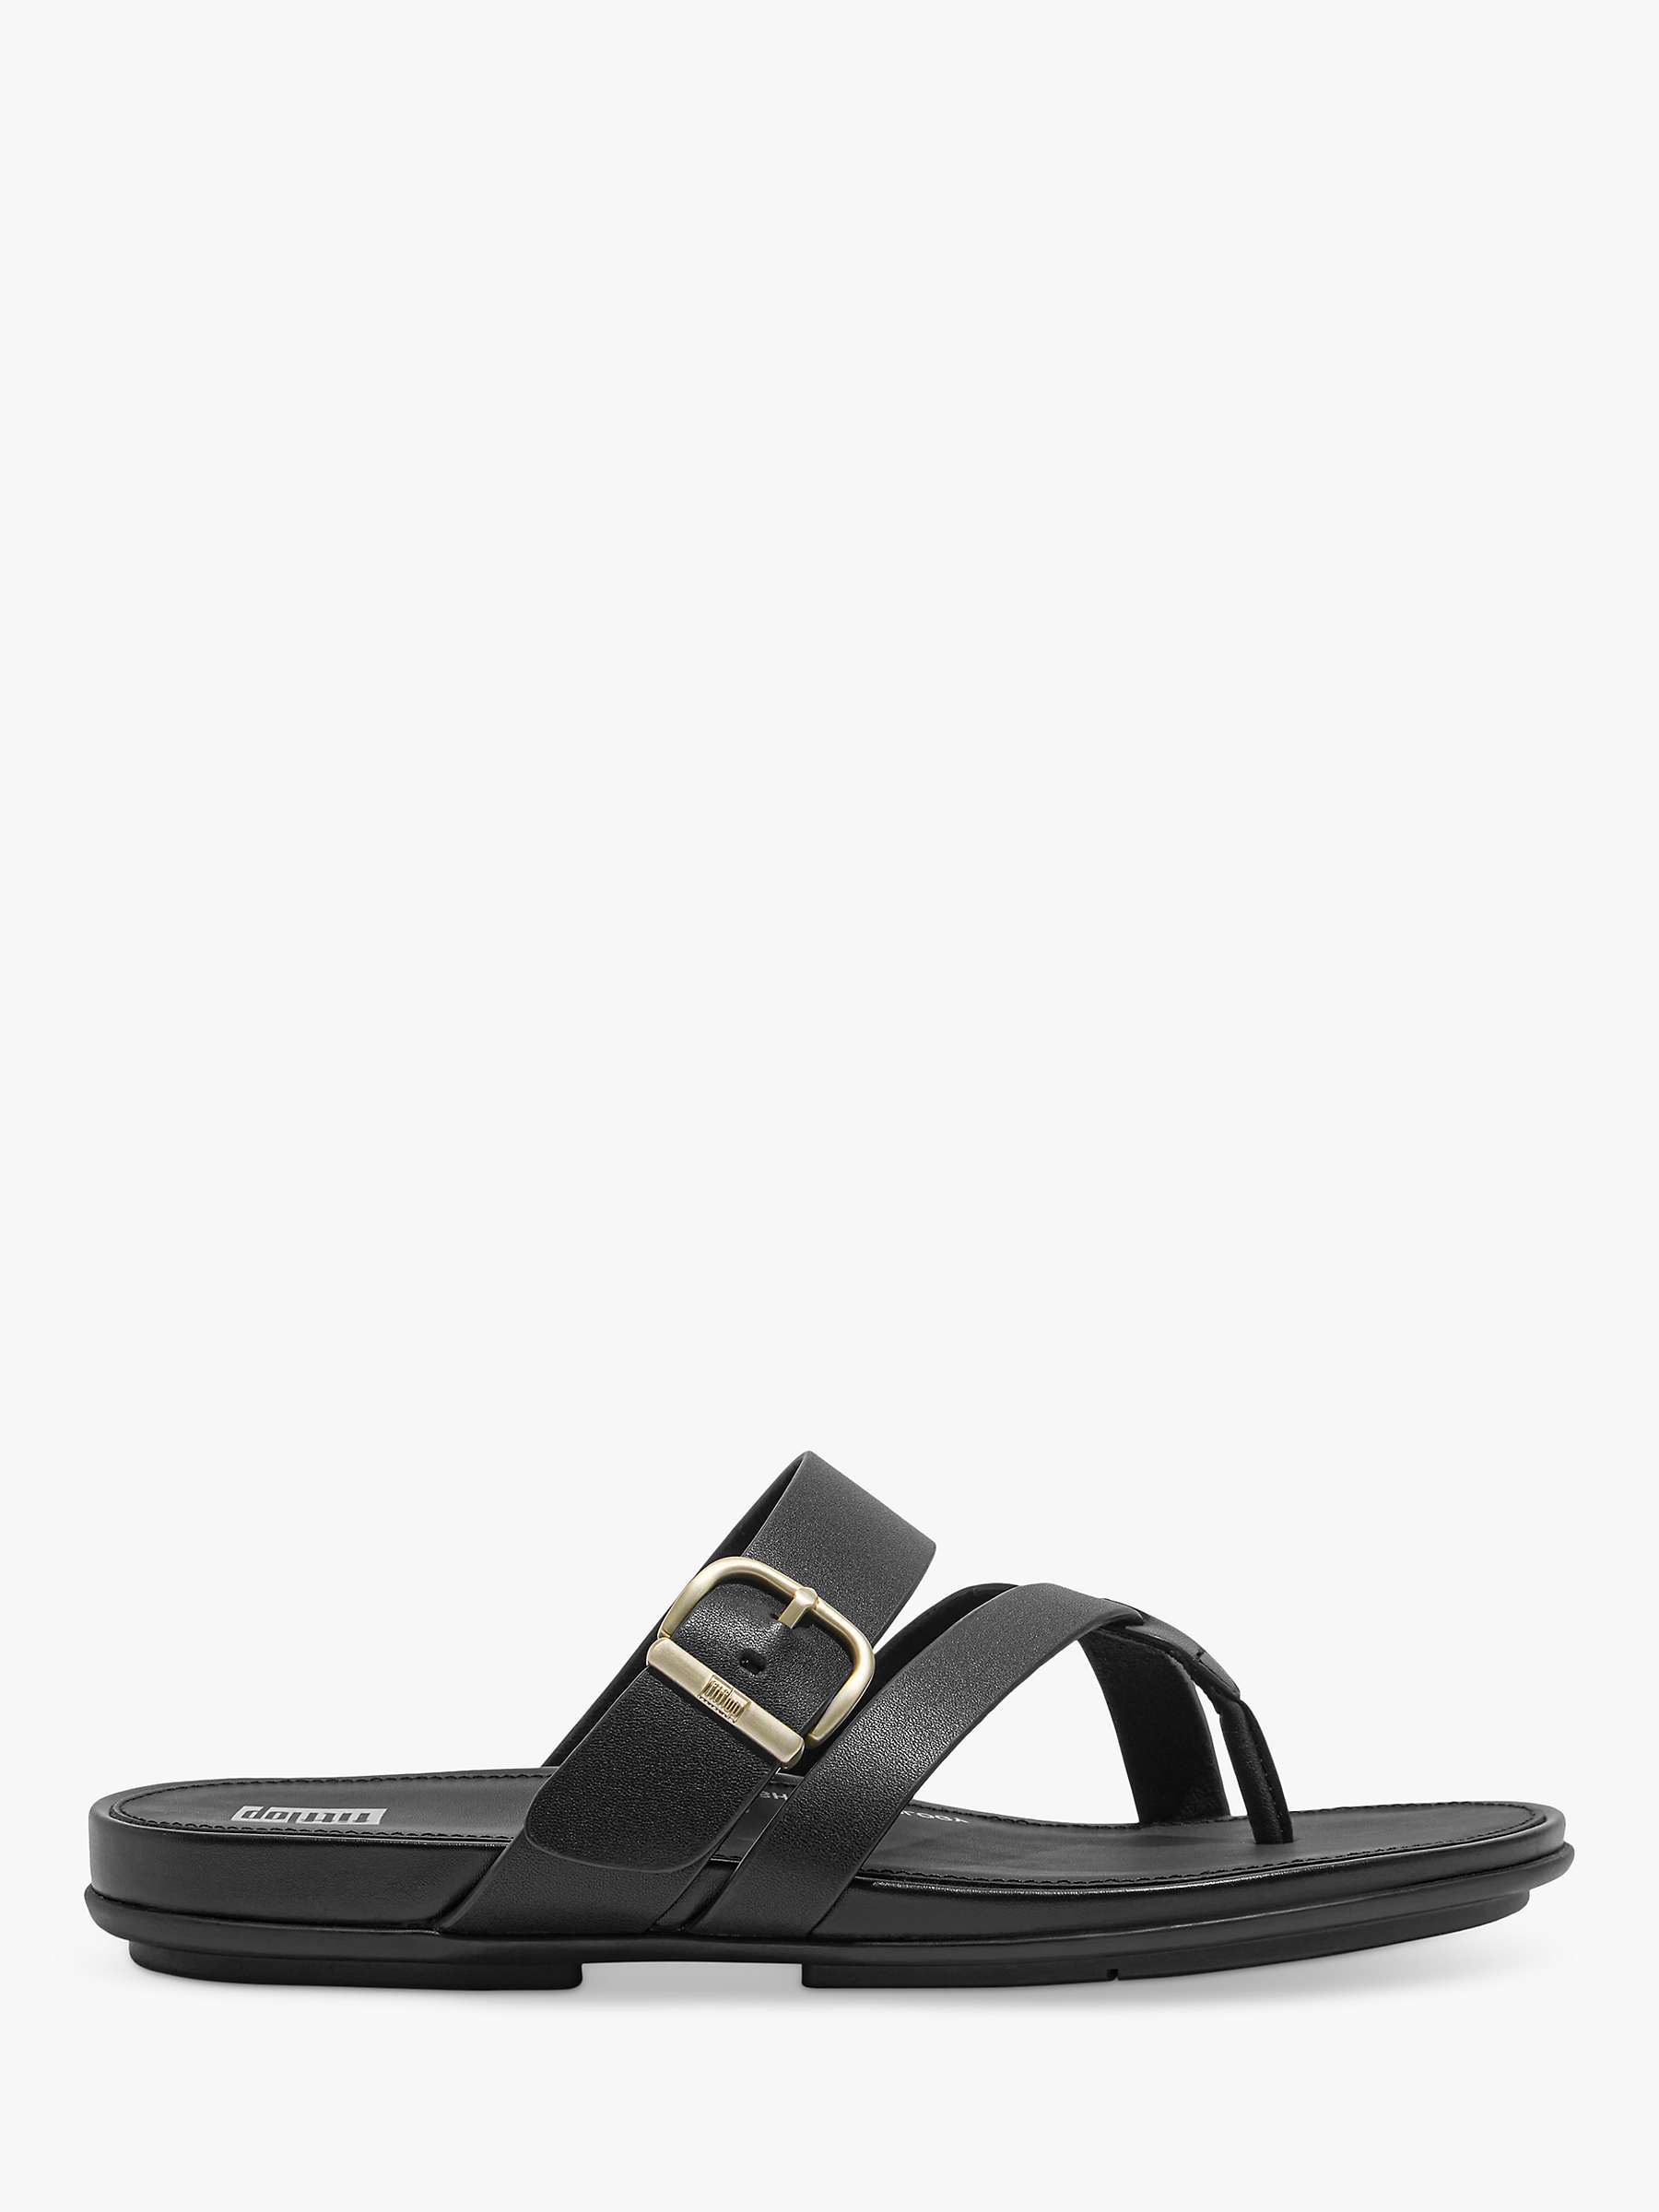 Buy FitFlop Gracie Leather Strappy Toe Post Sandals Online at johnlewis.com